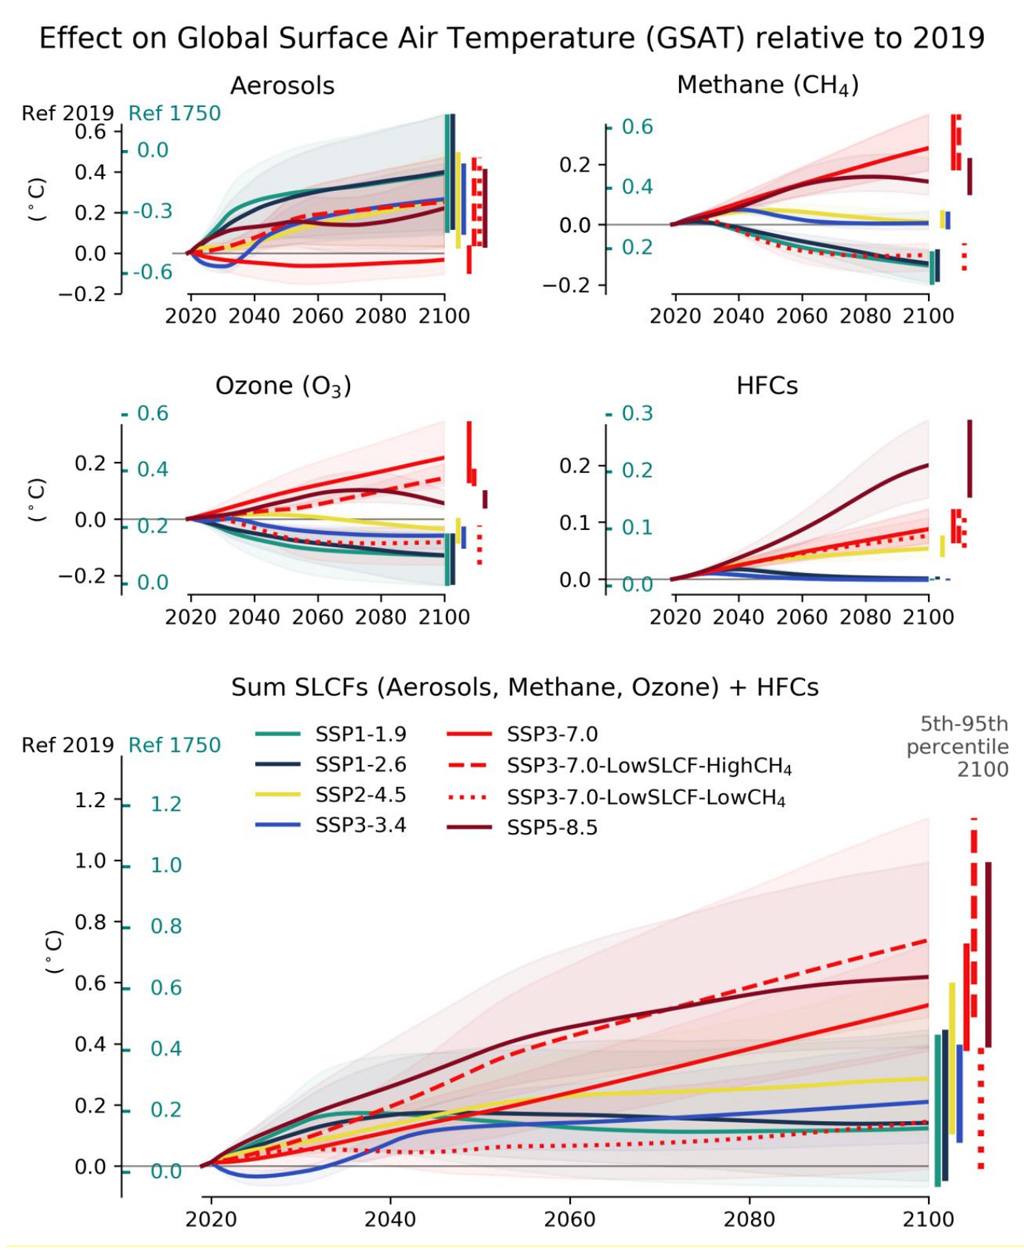 Effects of short-lived climate forcers and hydrofluorocarbons on global surface air temperature IPCC